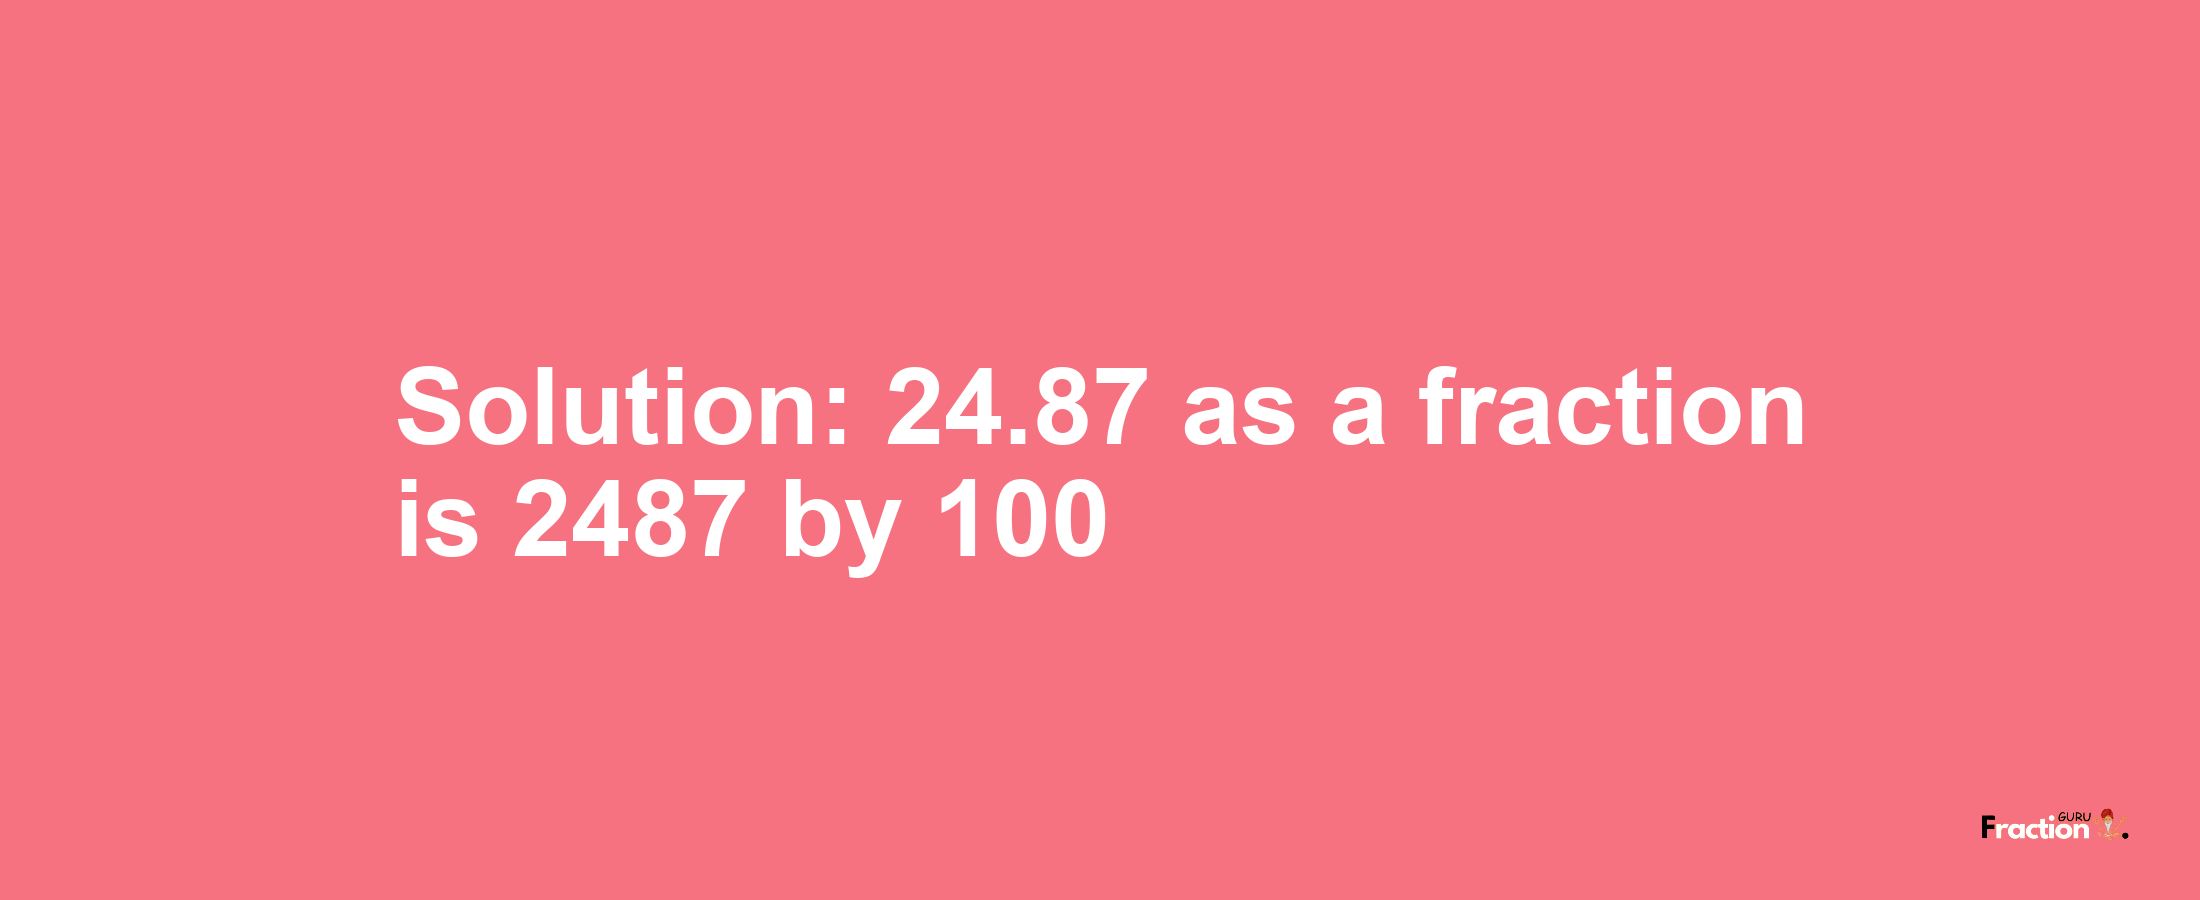 Solution:24.87 as a fraction is 2487/100